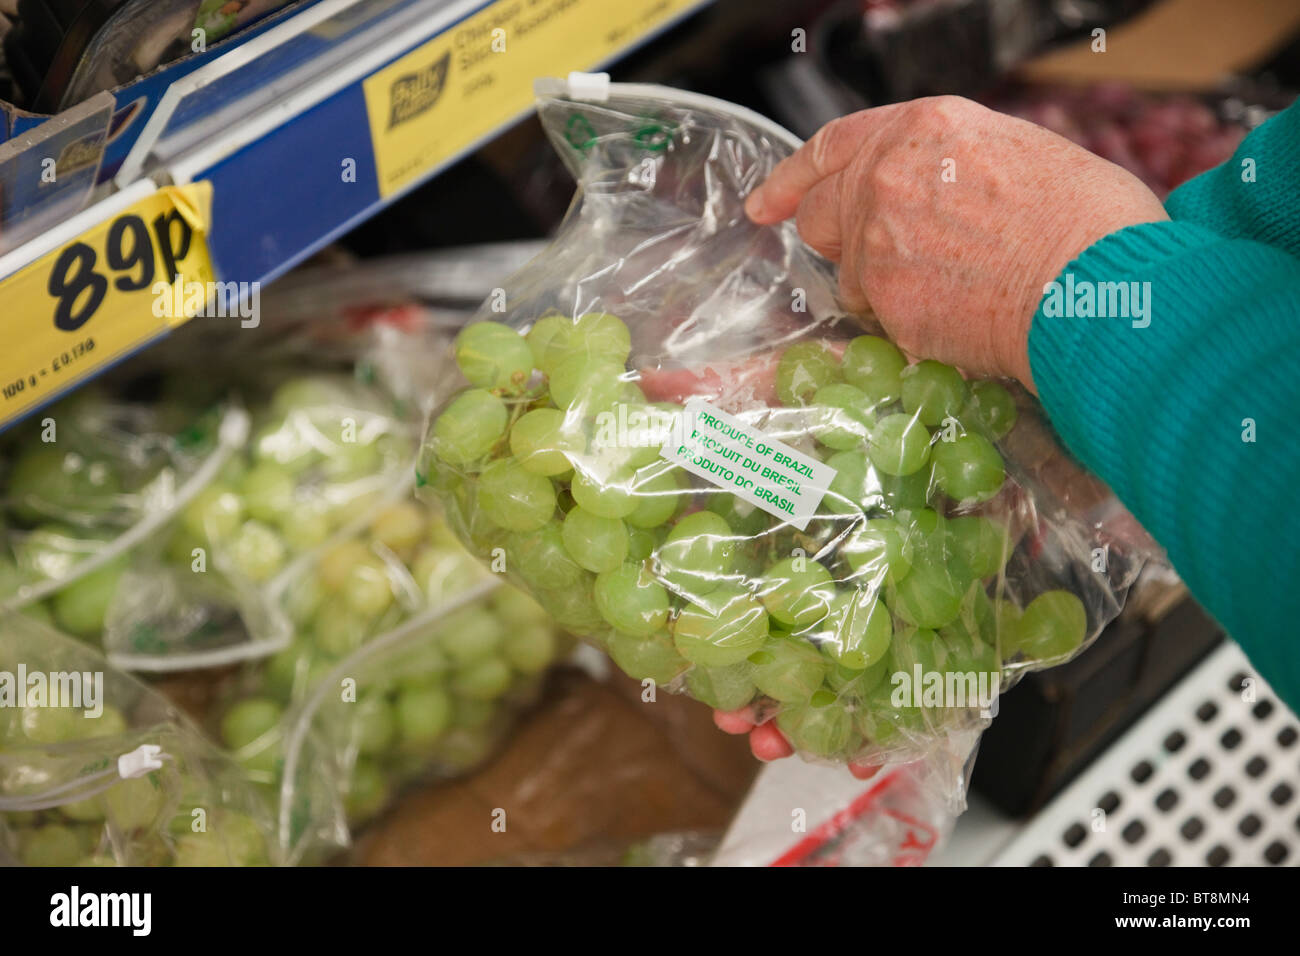 Woman choosing a packet of cheap priced grapes in a plastic bag displayed on a Lidl supermarket shelf. UK Britain Stock Photo